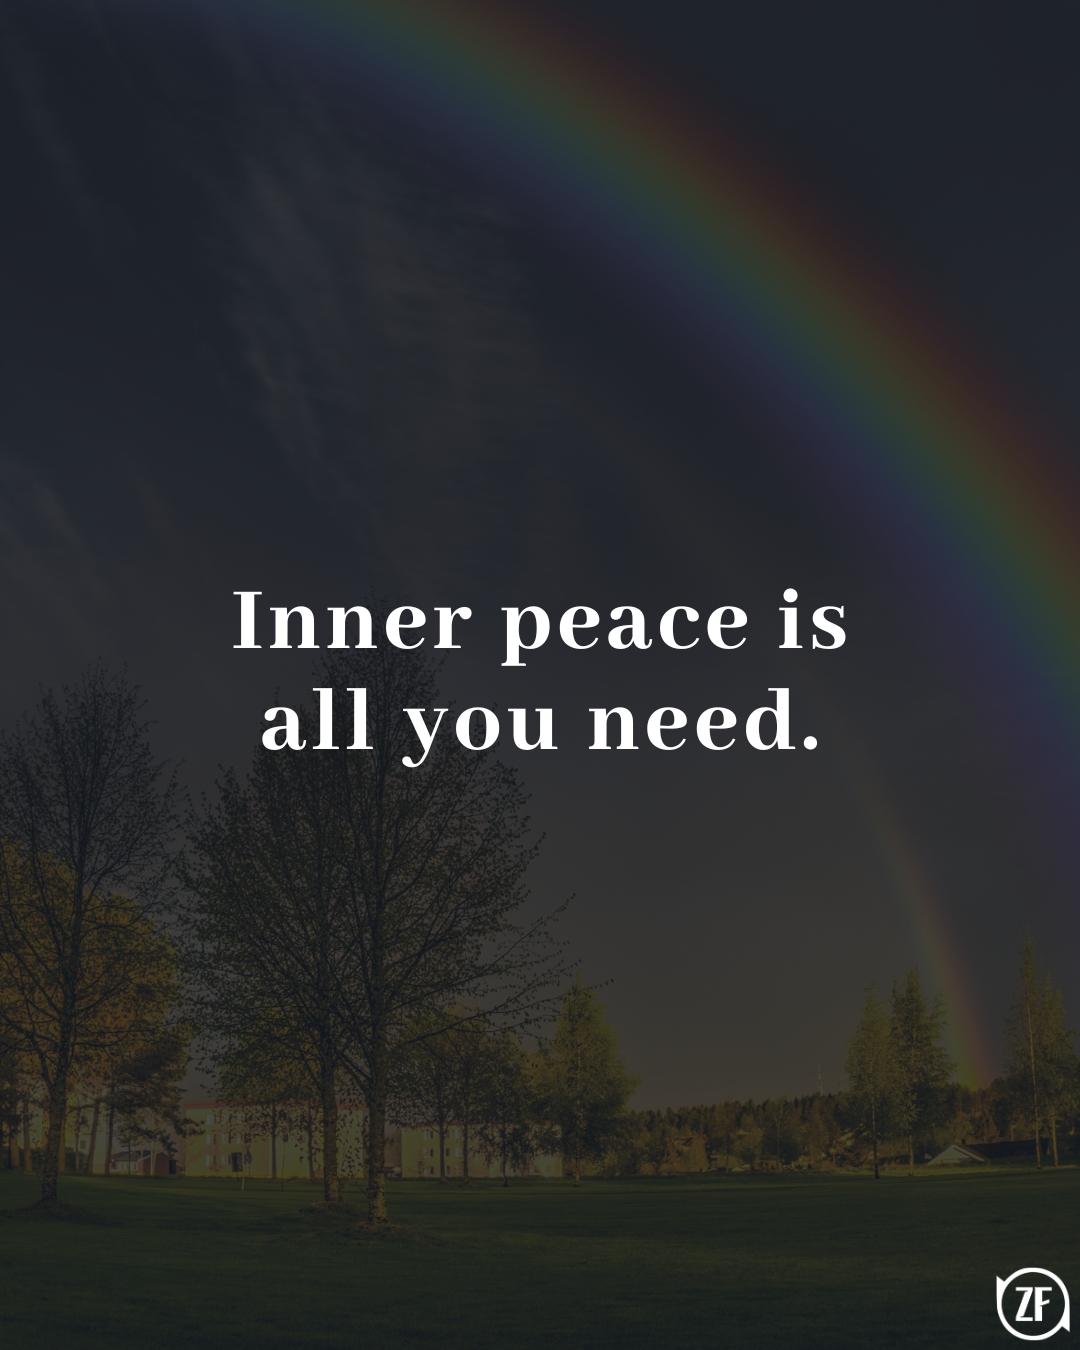 Inner peace is all you need.